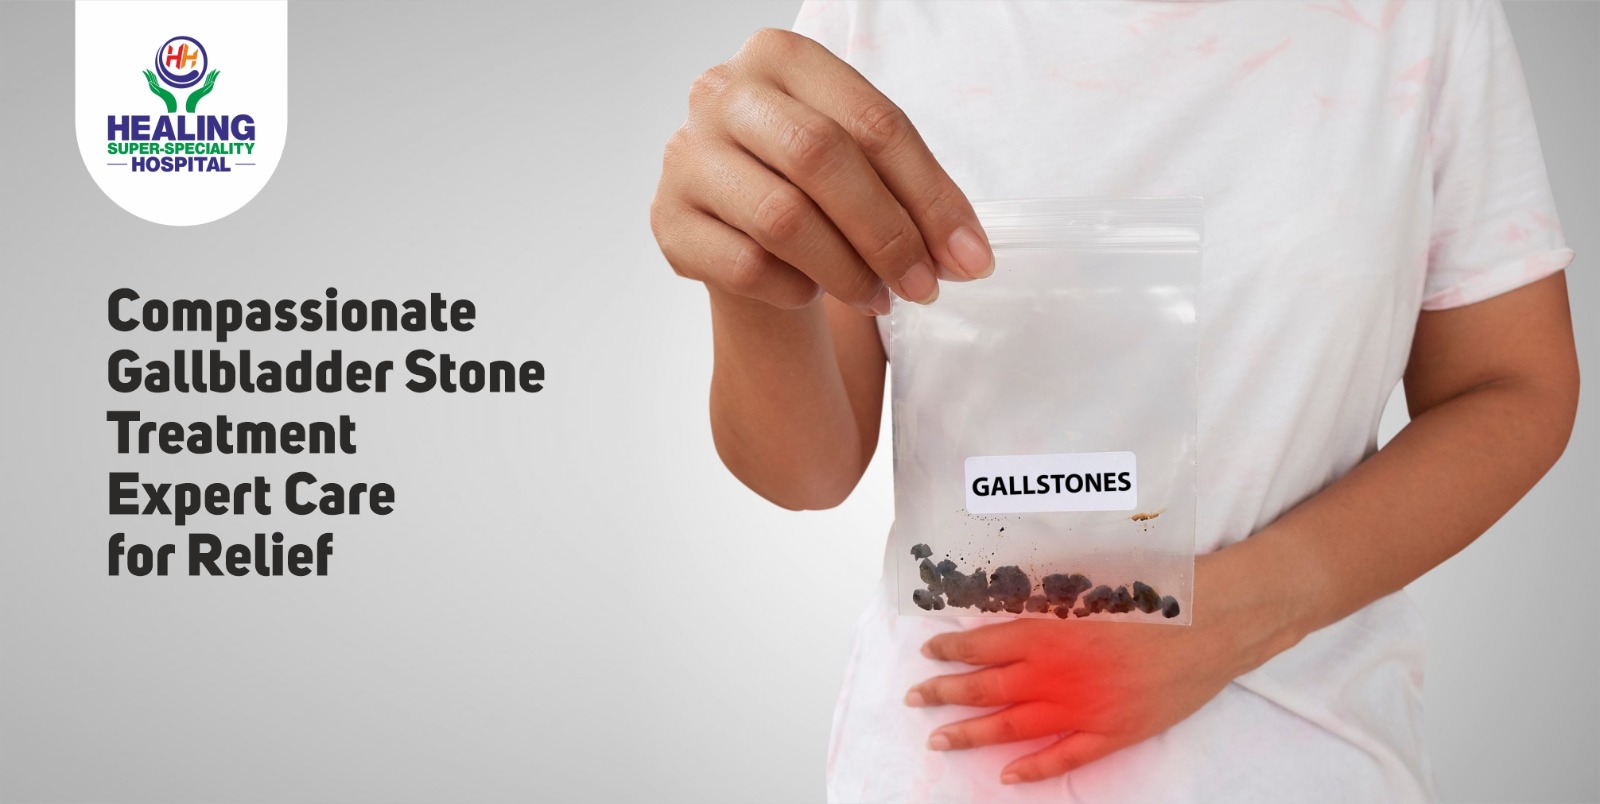 Compassionate Gallbladder Stone Treatment – Expert Care for Relief